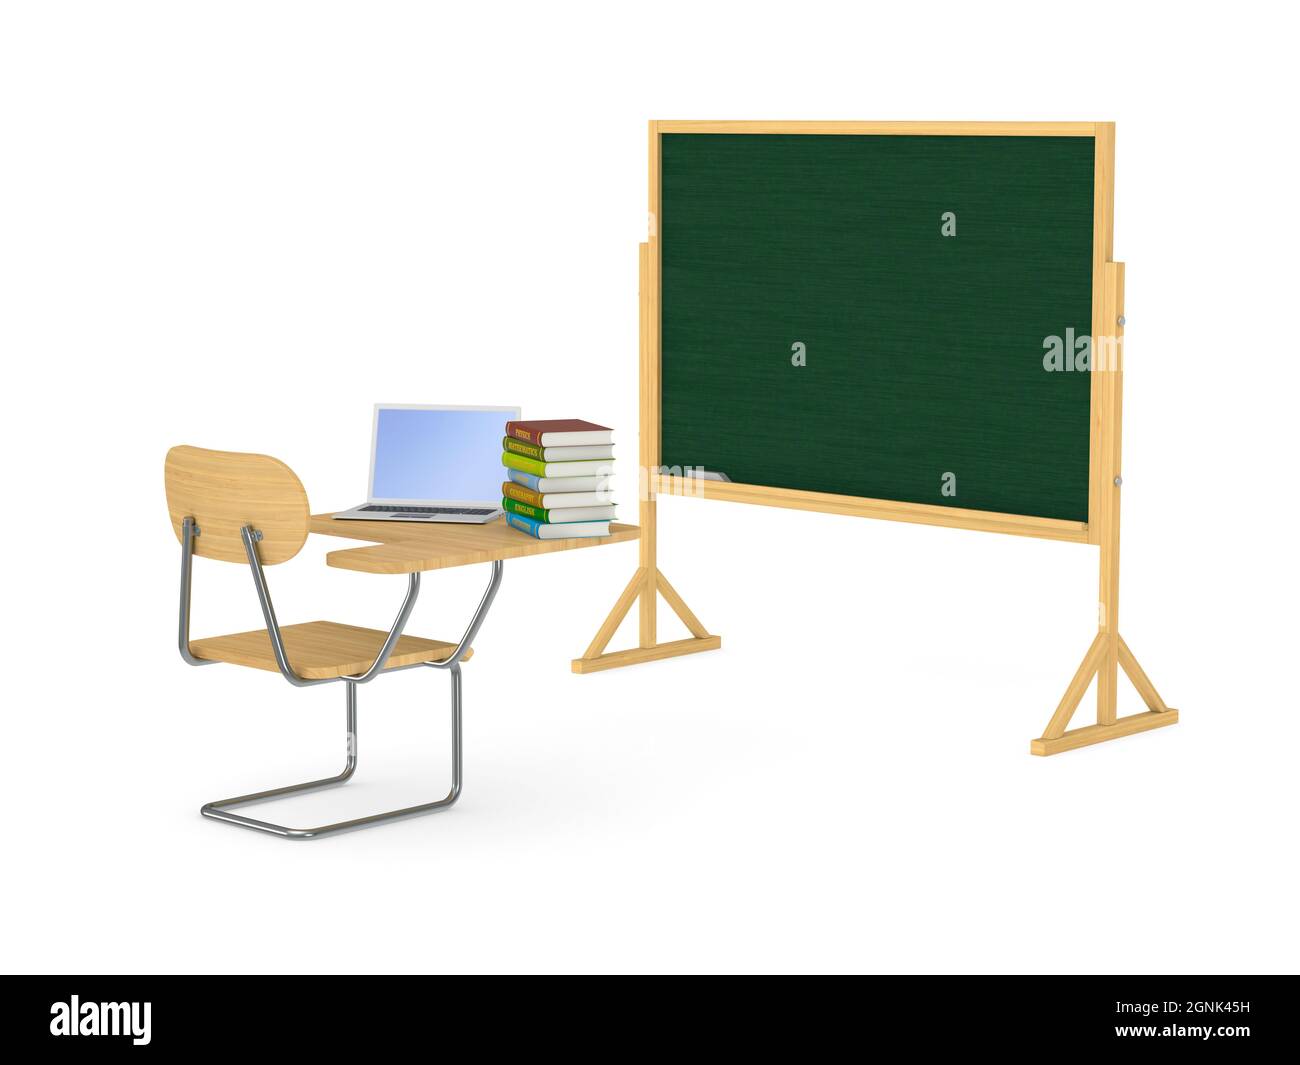 School desk, pile books and laptop on white background. Isolated 3D illustration Stock Photo